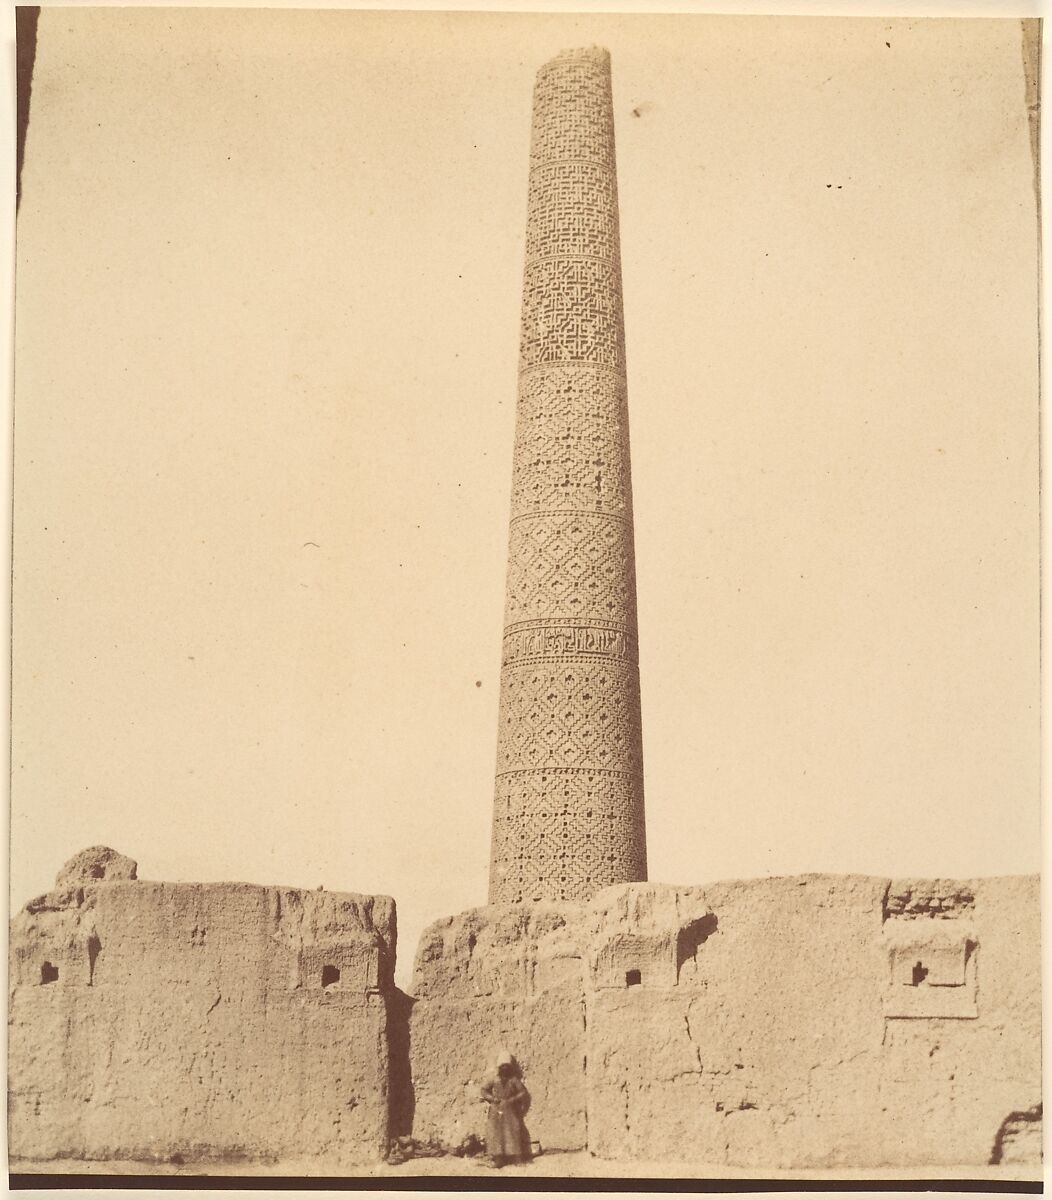 [Minaret of the Mosque of 40 Columns, Chehel Dokhtar, 359b.], Possibly by Luigi Pesce (Italian, 1818–1891), Albumen silver print 